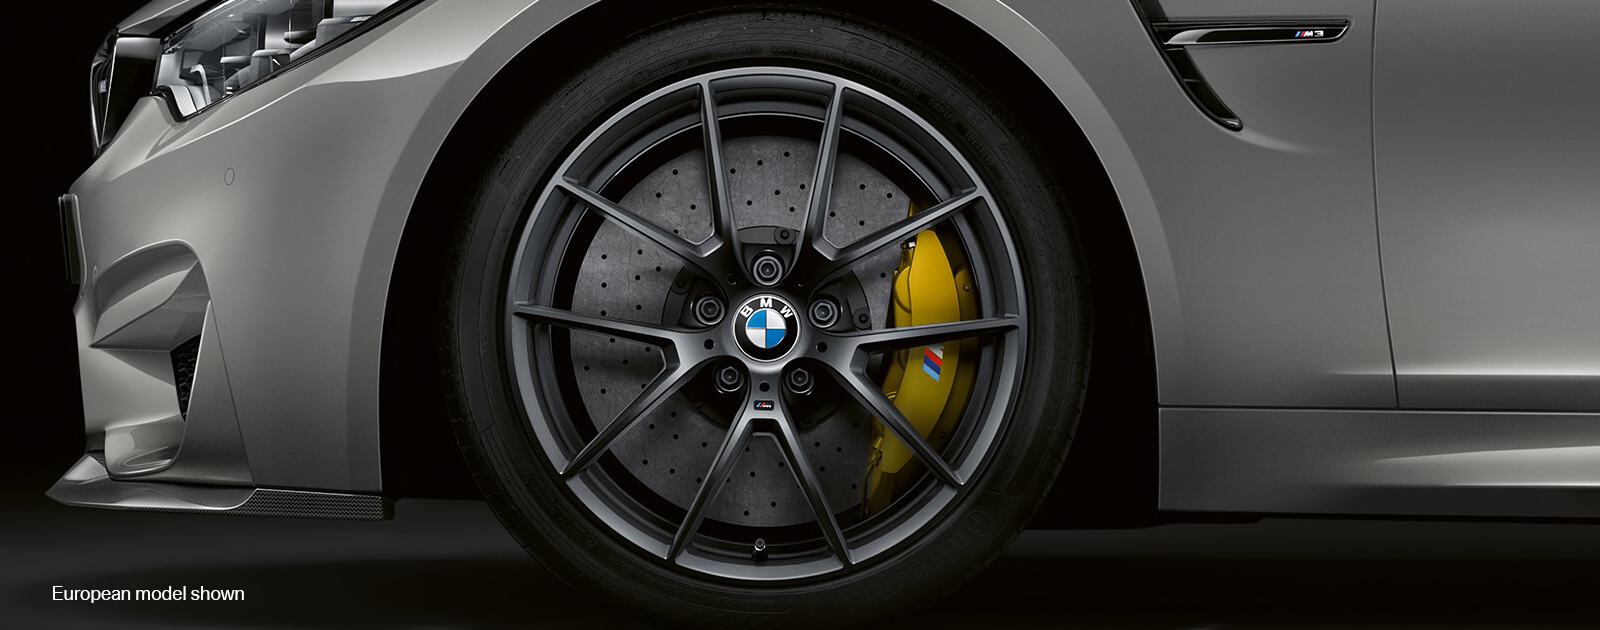 Manual Transmission Here to Stay - BMW of Akron